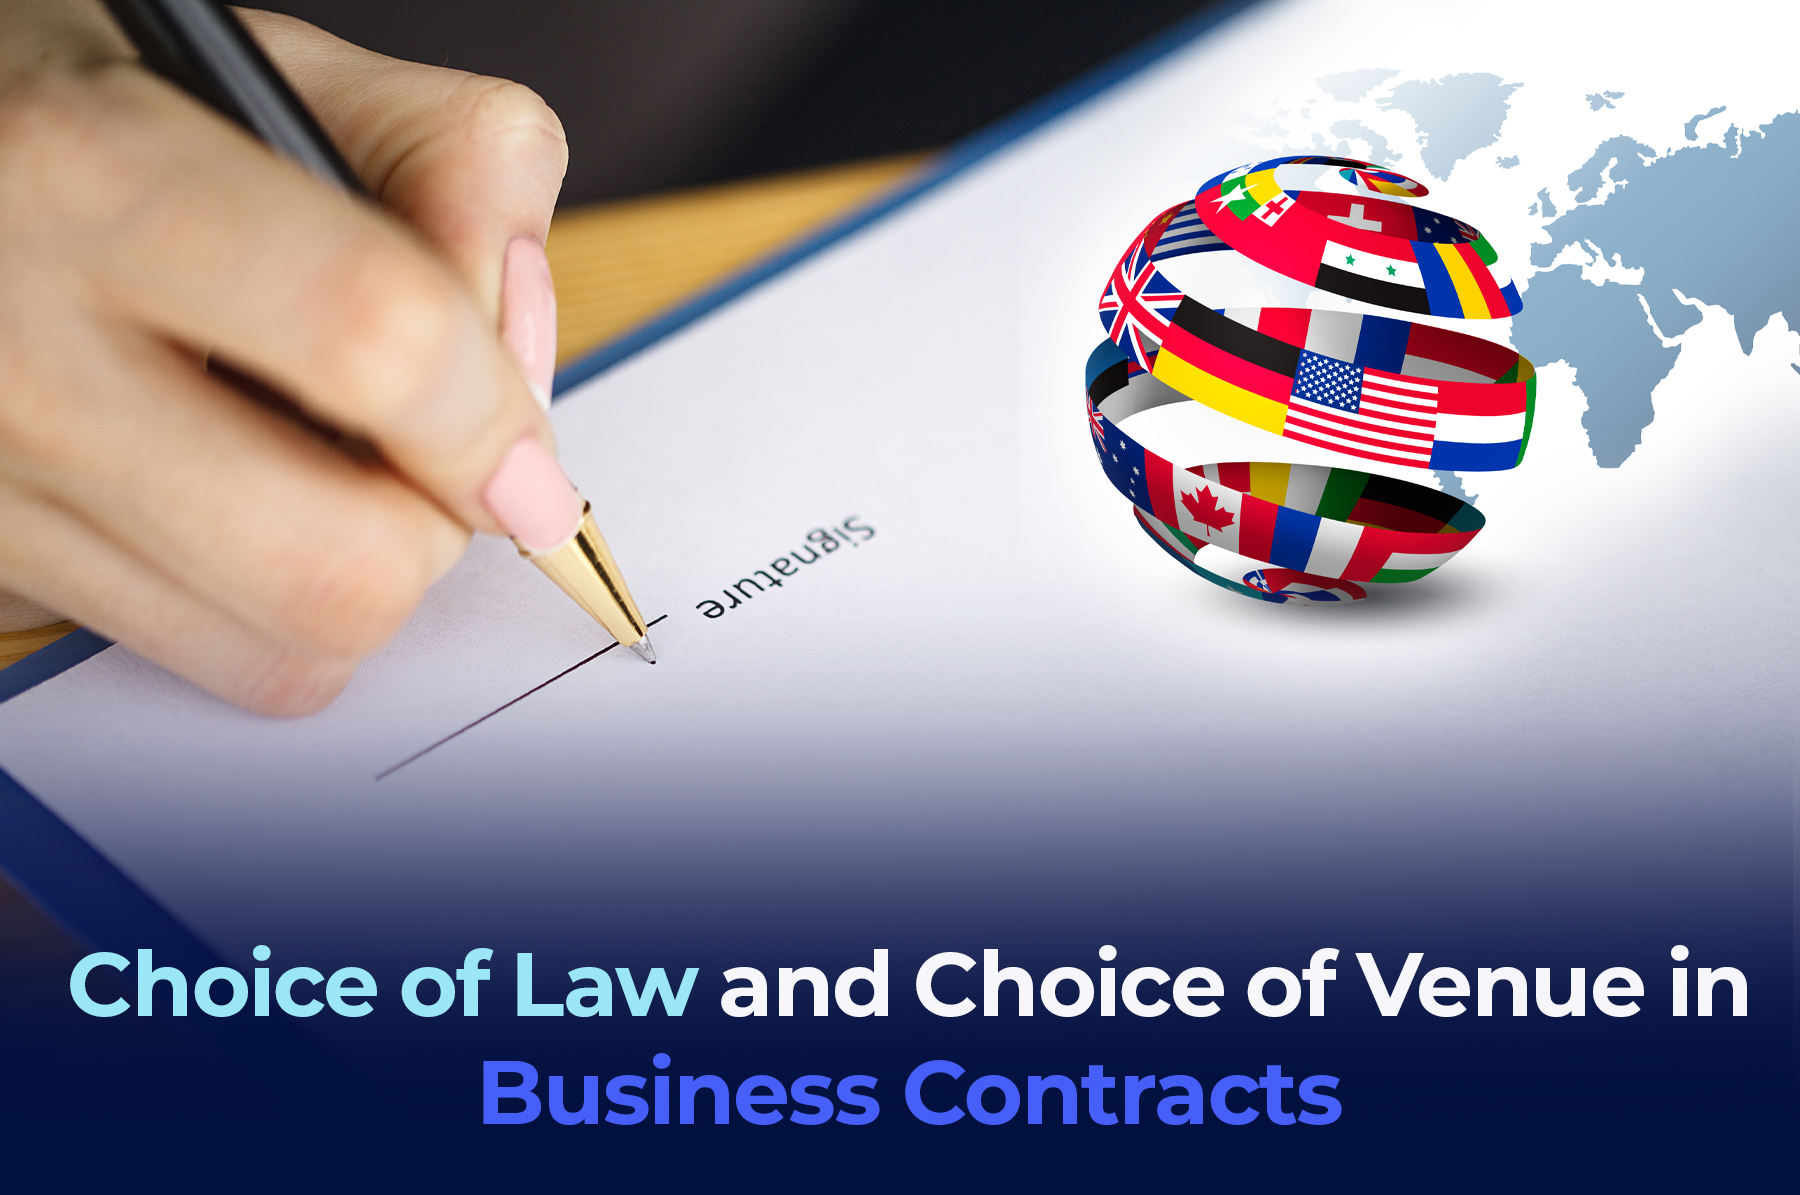 A picture of a female hand writing a signature in a contract, flags of the world and a map symbol with the phrase Choice of Law and Choice of Venue in Business Contracts"